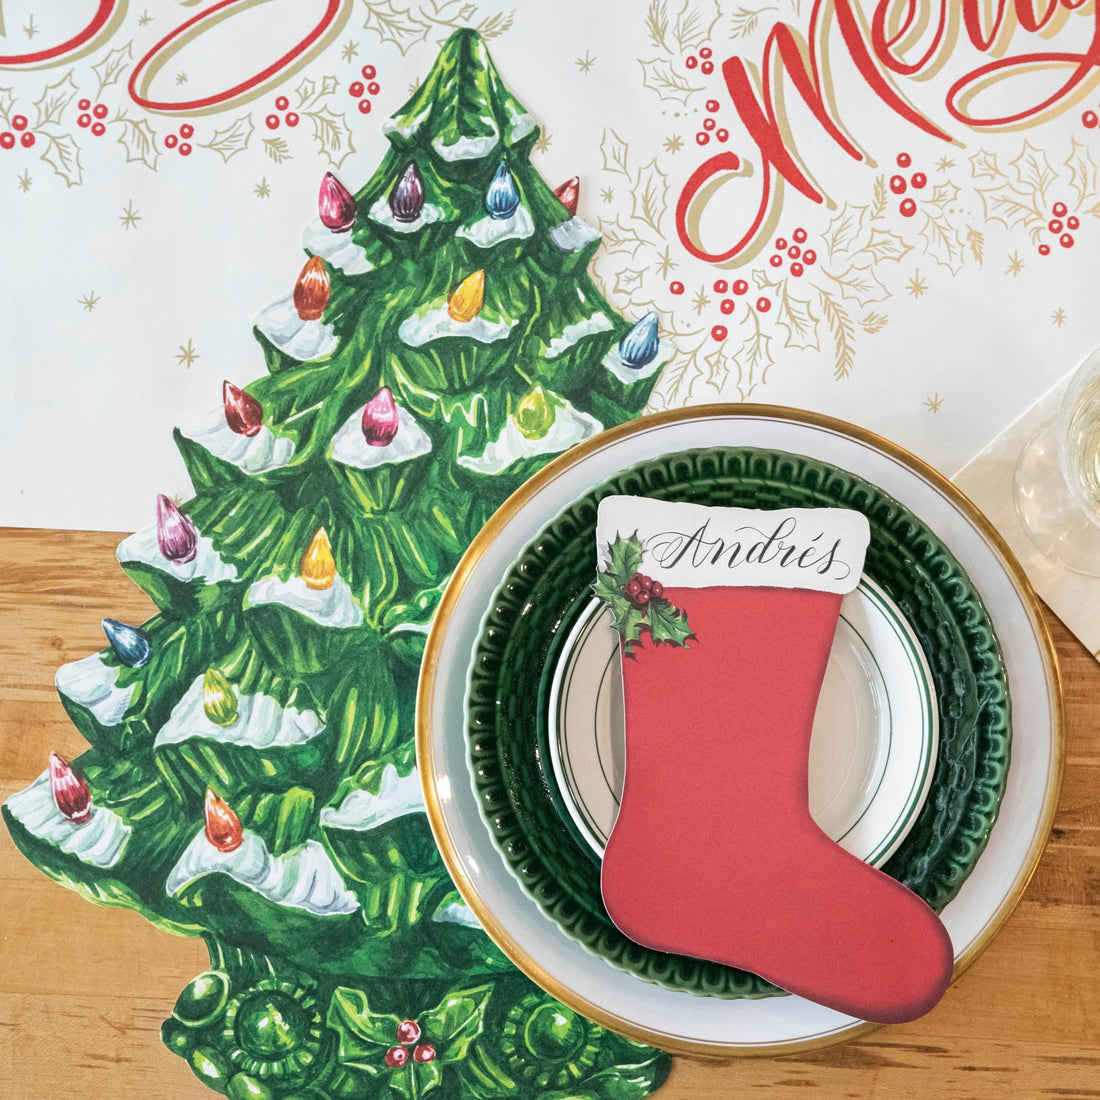 The Die-cut Vintage Christmas Tree Placemat under an elegant holiday place setting, from above.